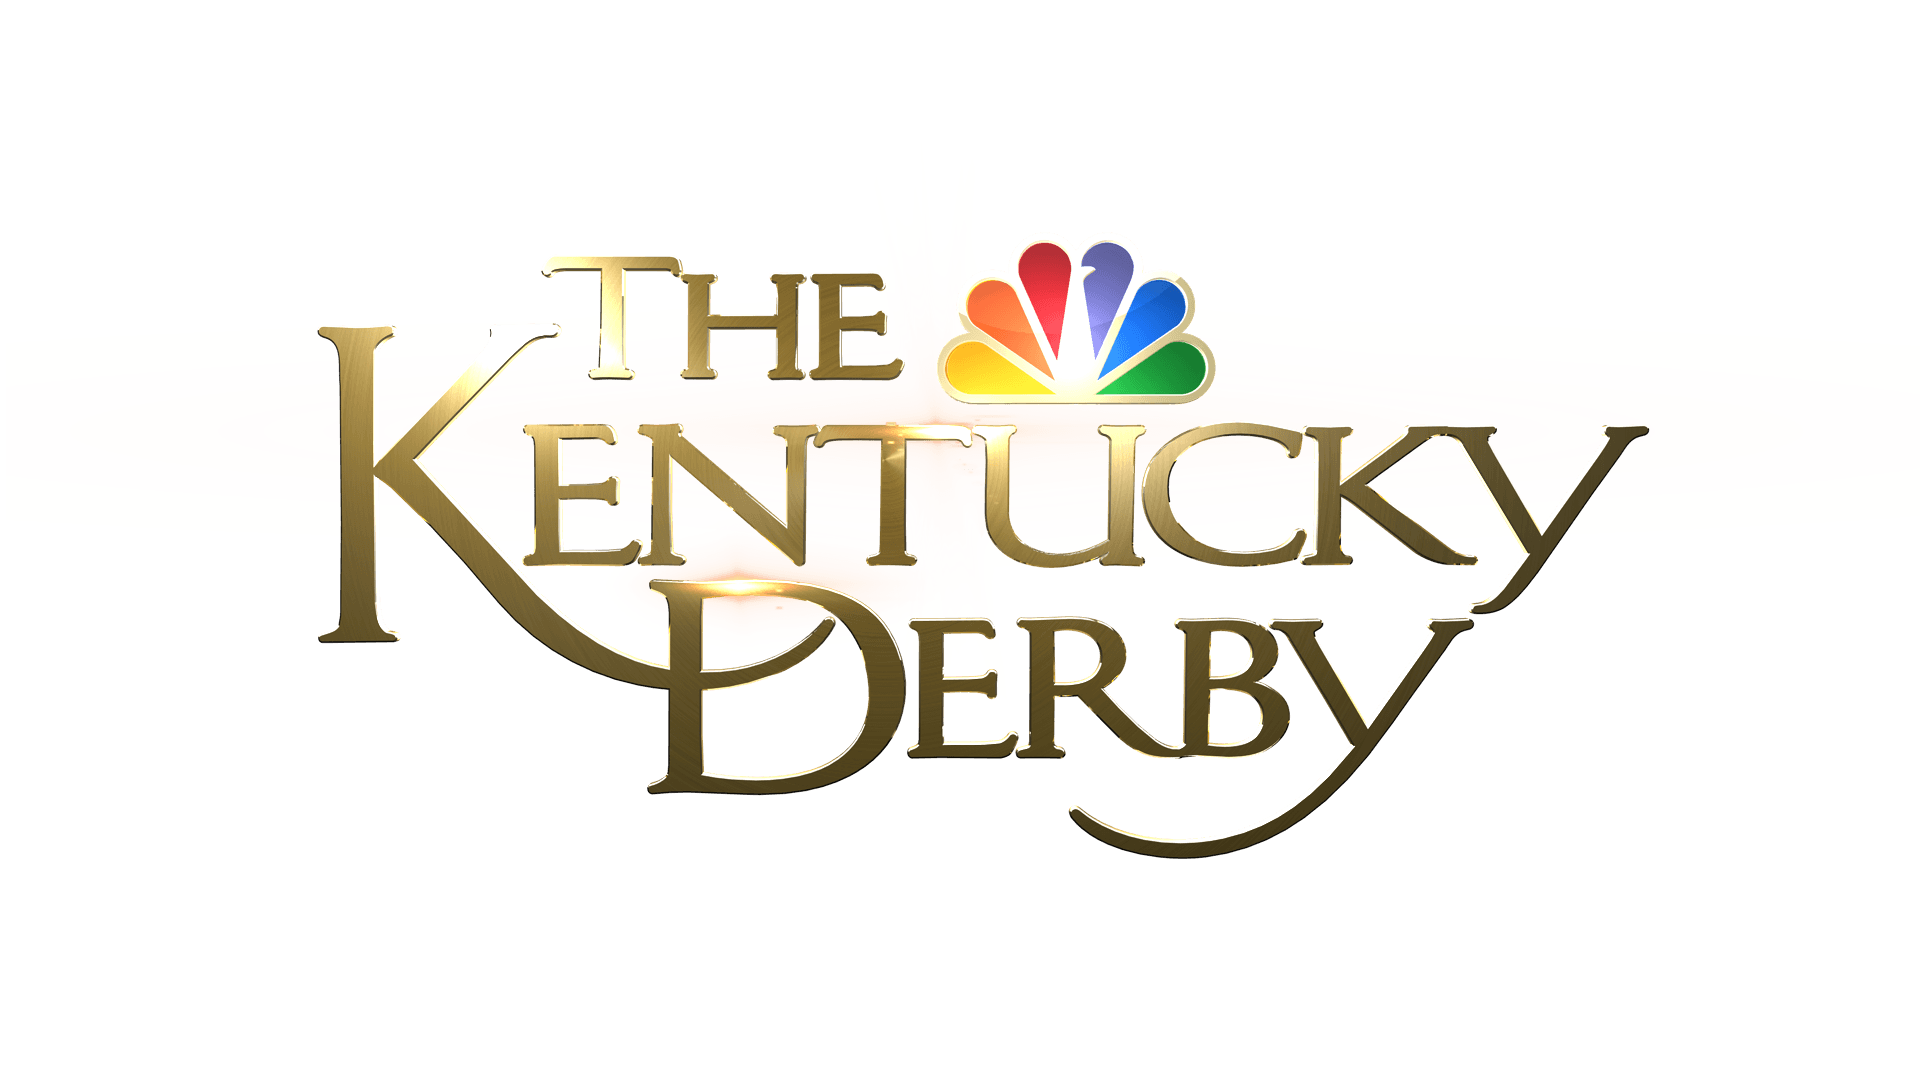 NBC'S RECORD 5 HOUR KENTUCKY DERBY BROADCAST THIS SAT., MAY LIVE